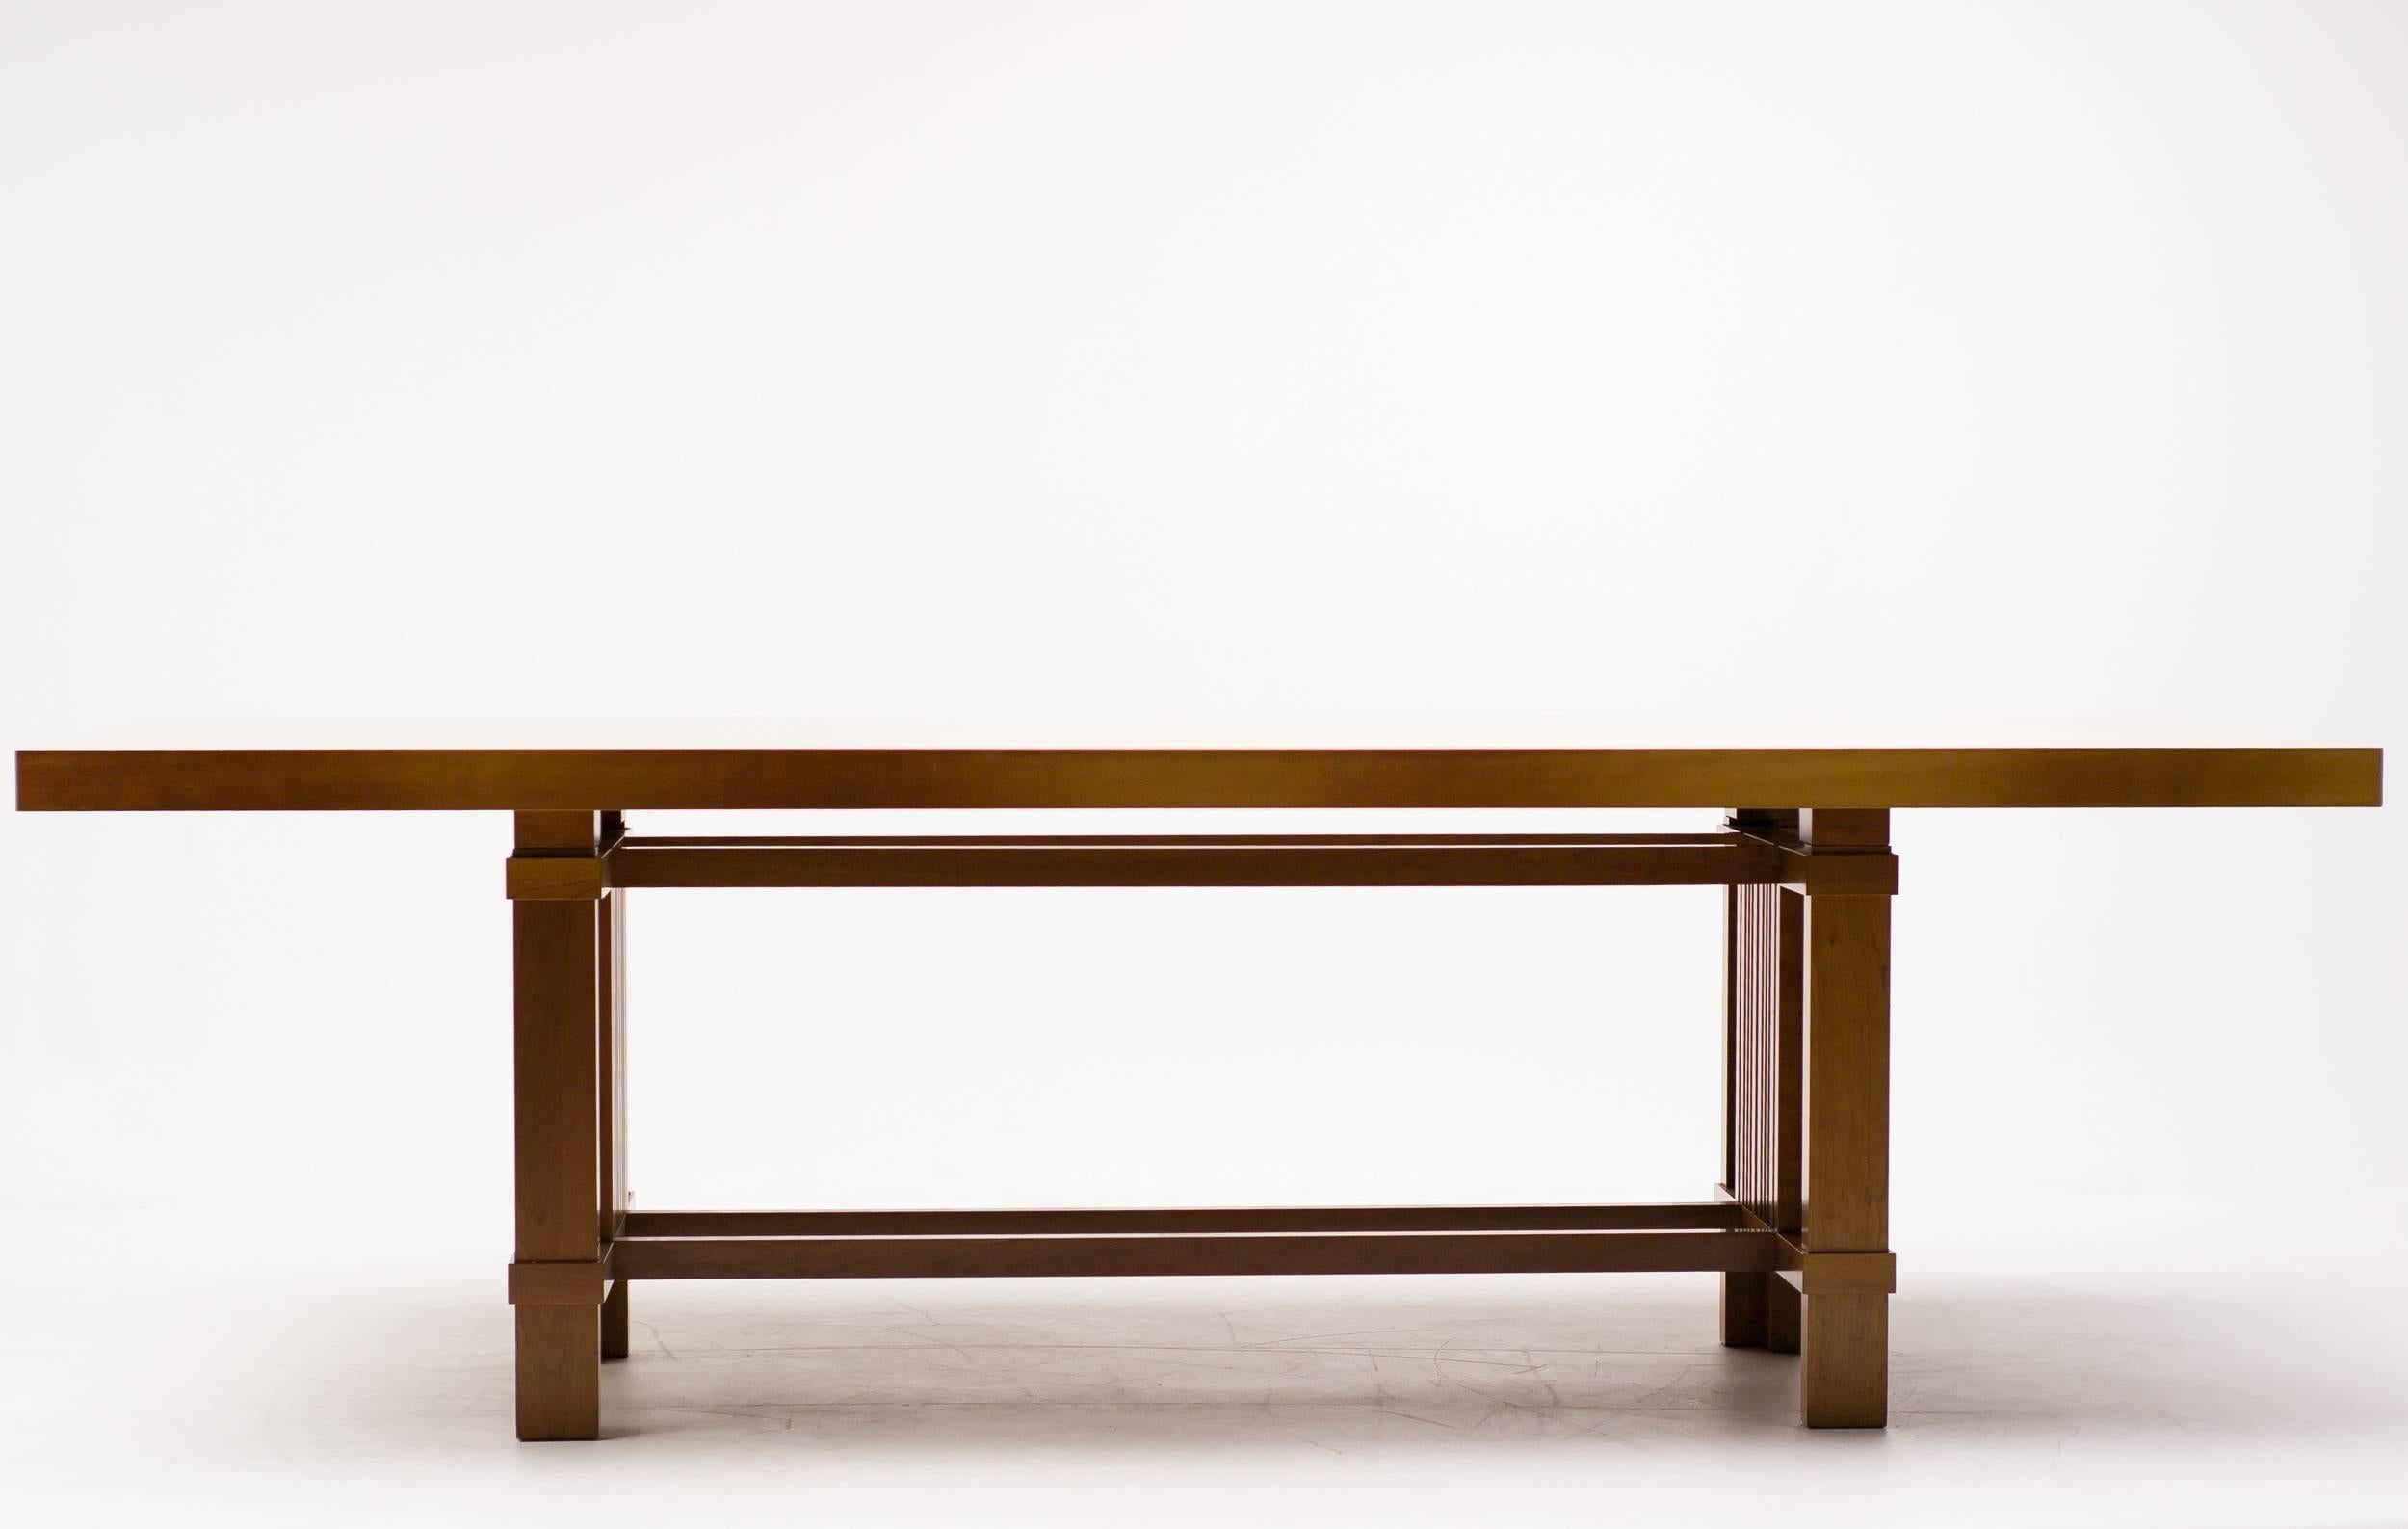 Distinguished large dining table, in natural cherry. Vintage 1989 version in very good condition. The table has only has a few very minor scuffs and one small wear spot as pictured. Marked with Cassina stamp, serial no. and Frank Lloyd Wright